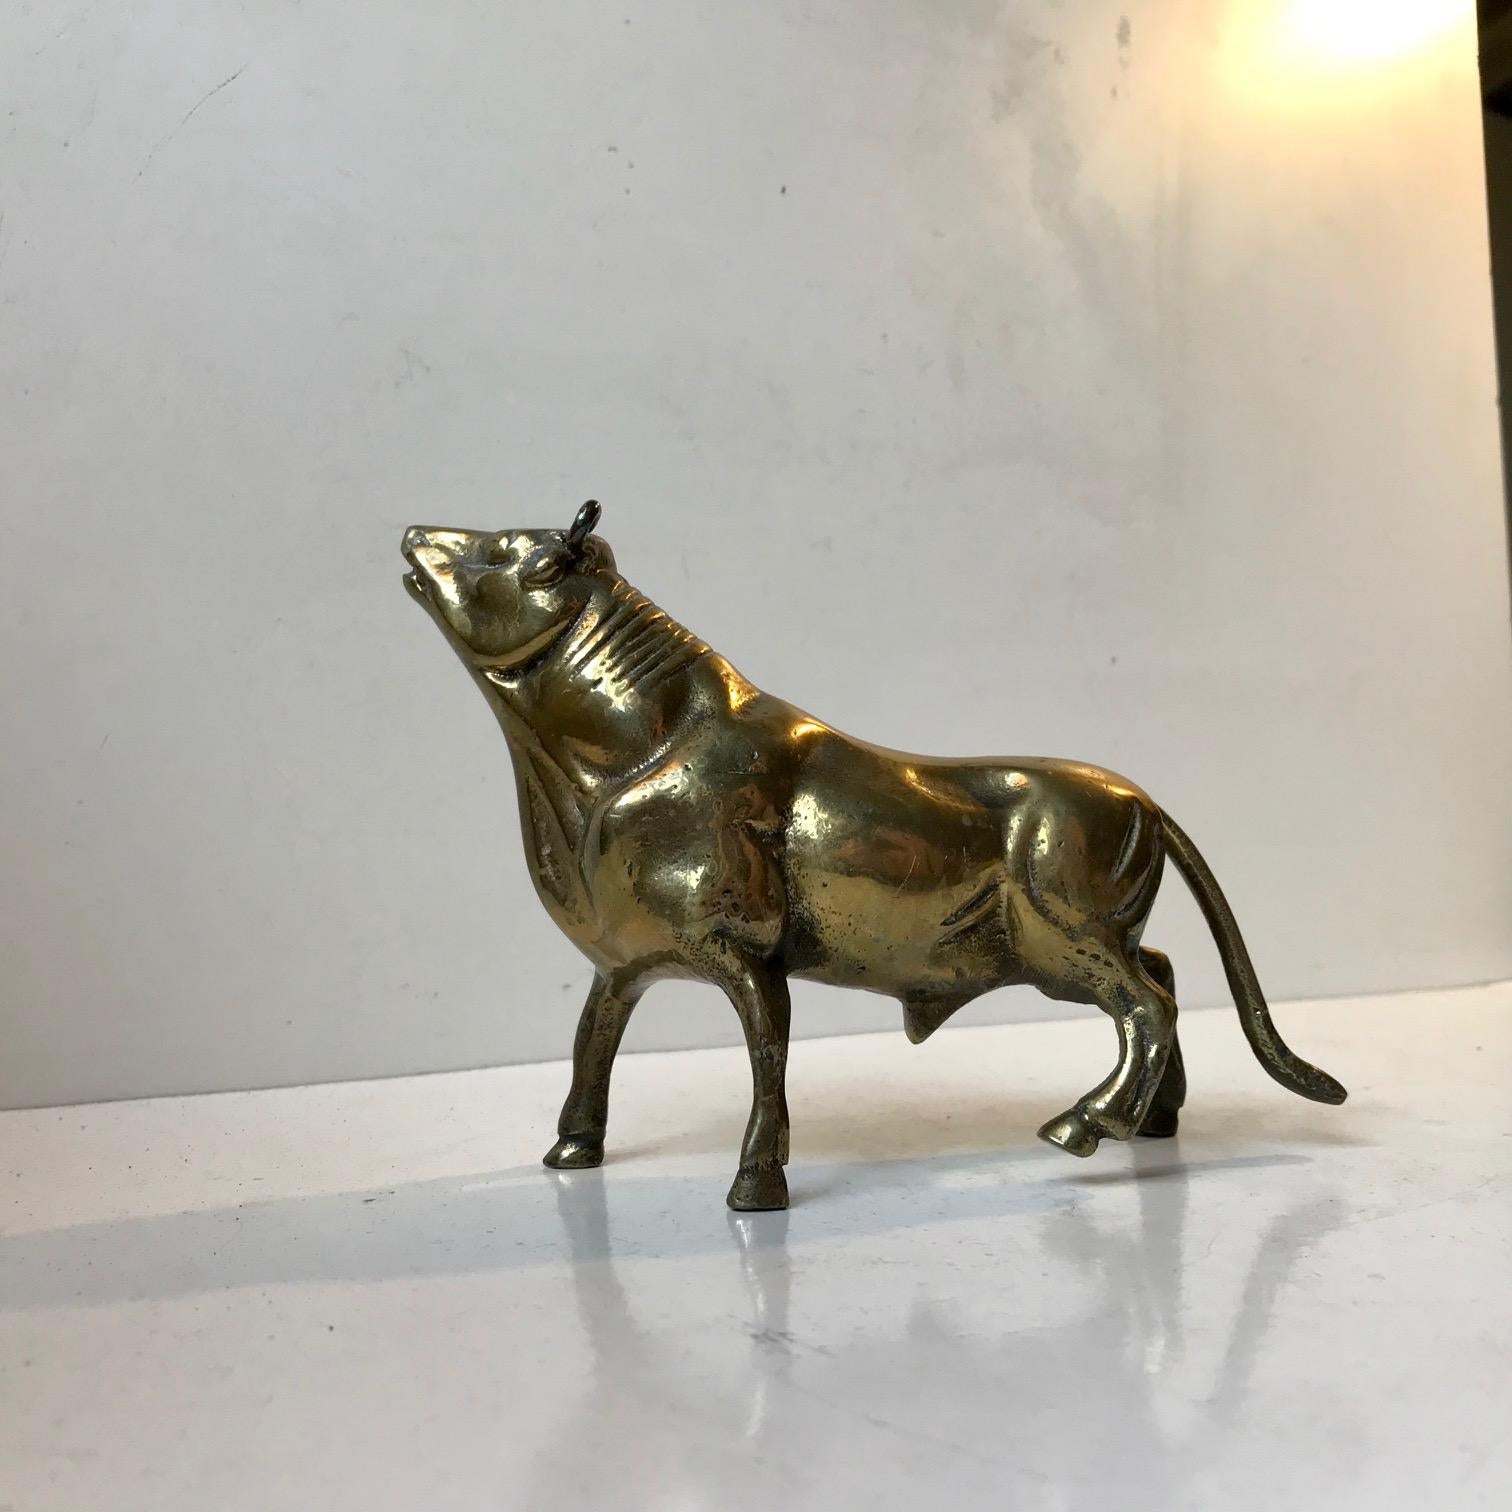 Scandinavian figurine or small sculpture of a young bull. It is made from cast brass and shows great details and rich patina consistent with its age. Measurements: W/L: 19 cm, H: 12.5 cm.